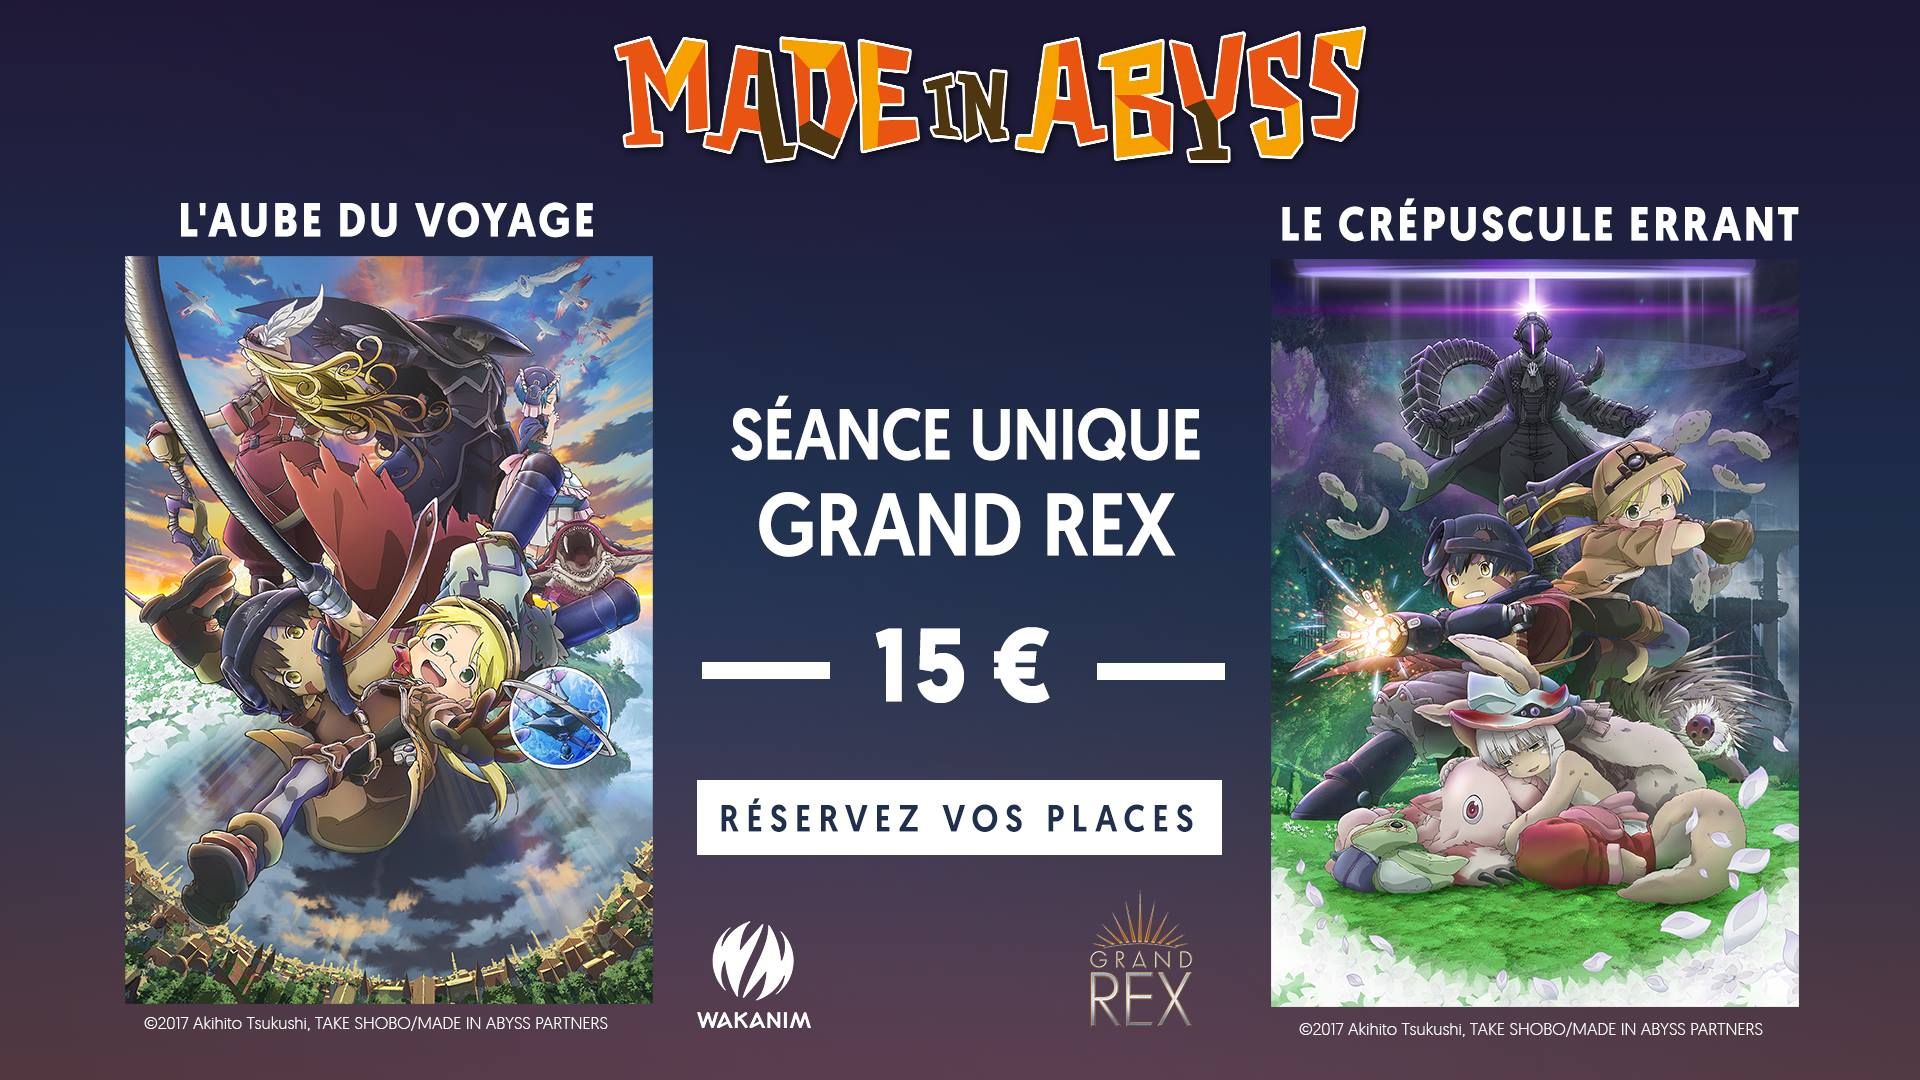 mangas - Projection - Made in Abyss au Grand Rex